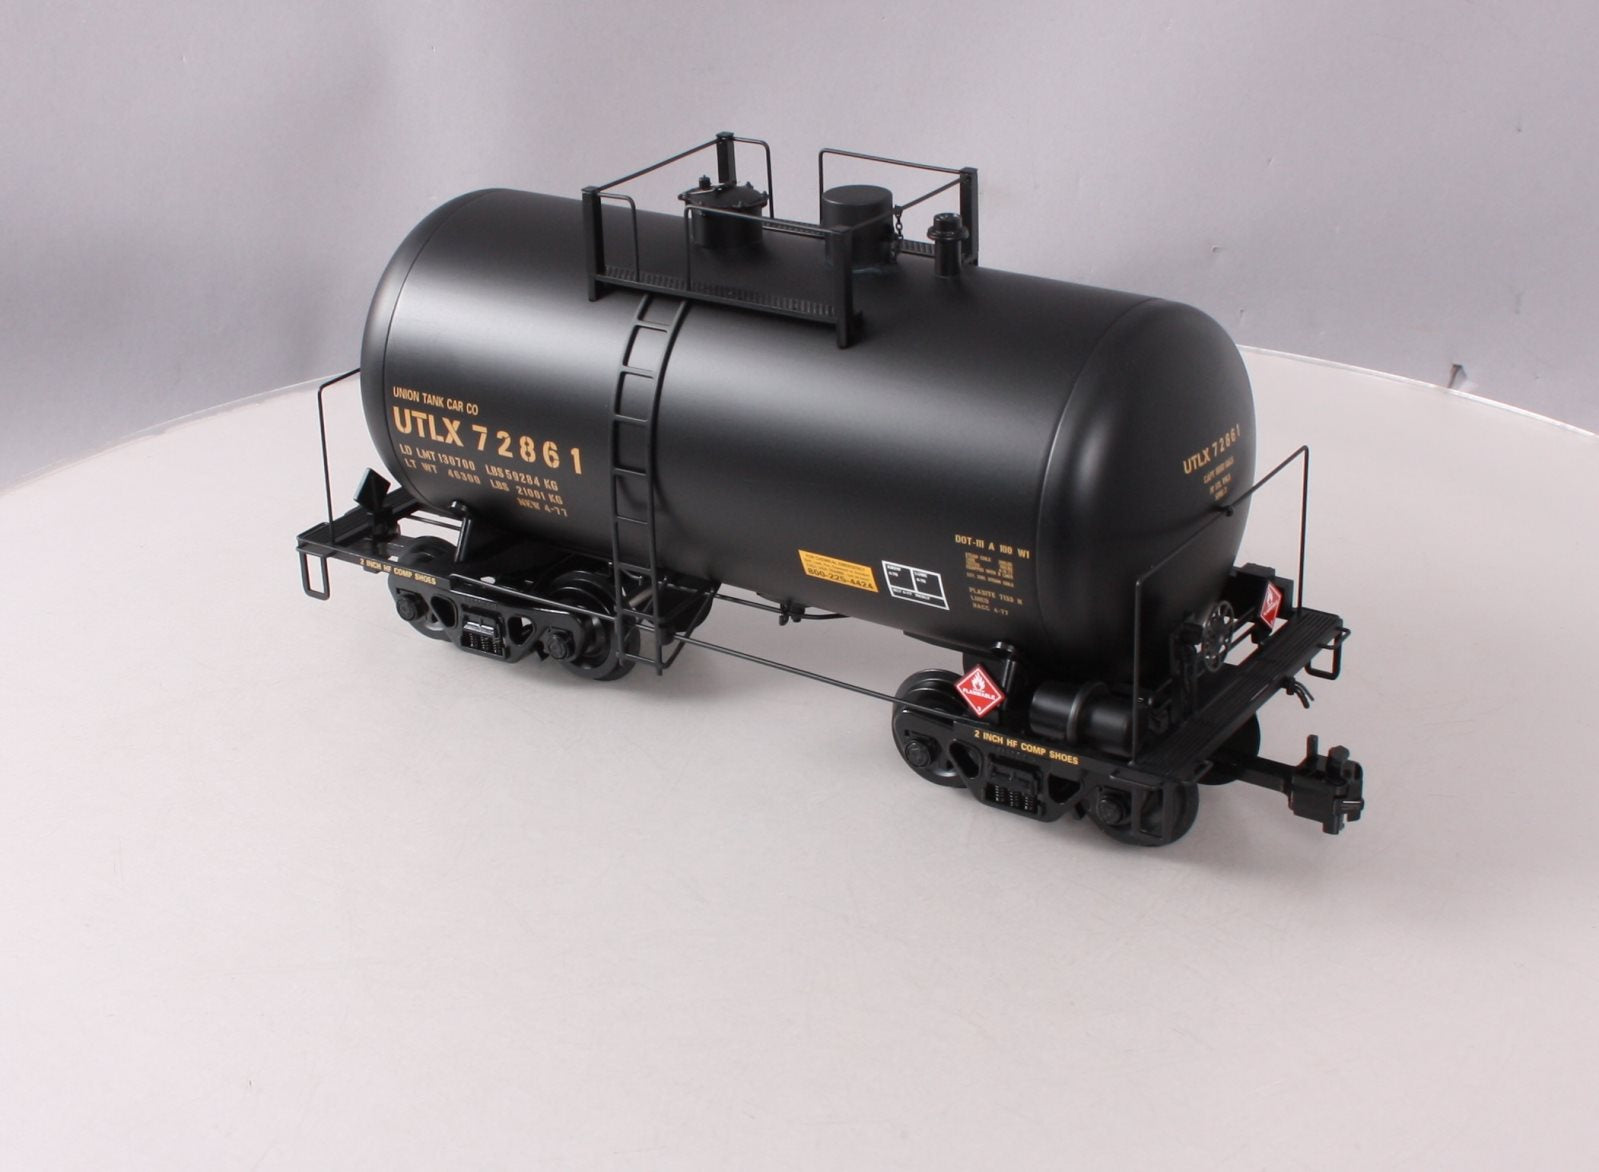 USA Trains R15202 G UTLX Ultimate Series 29' Beer Can Tank Car #72858